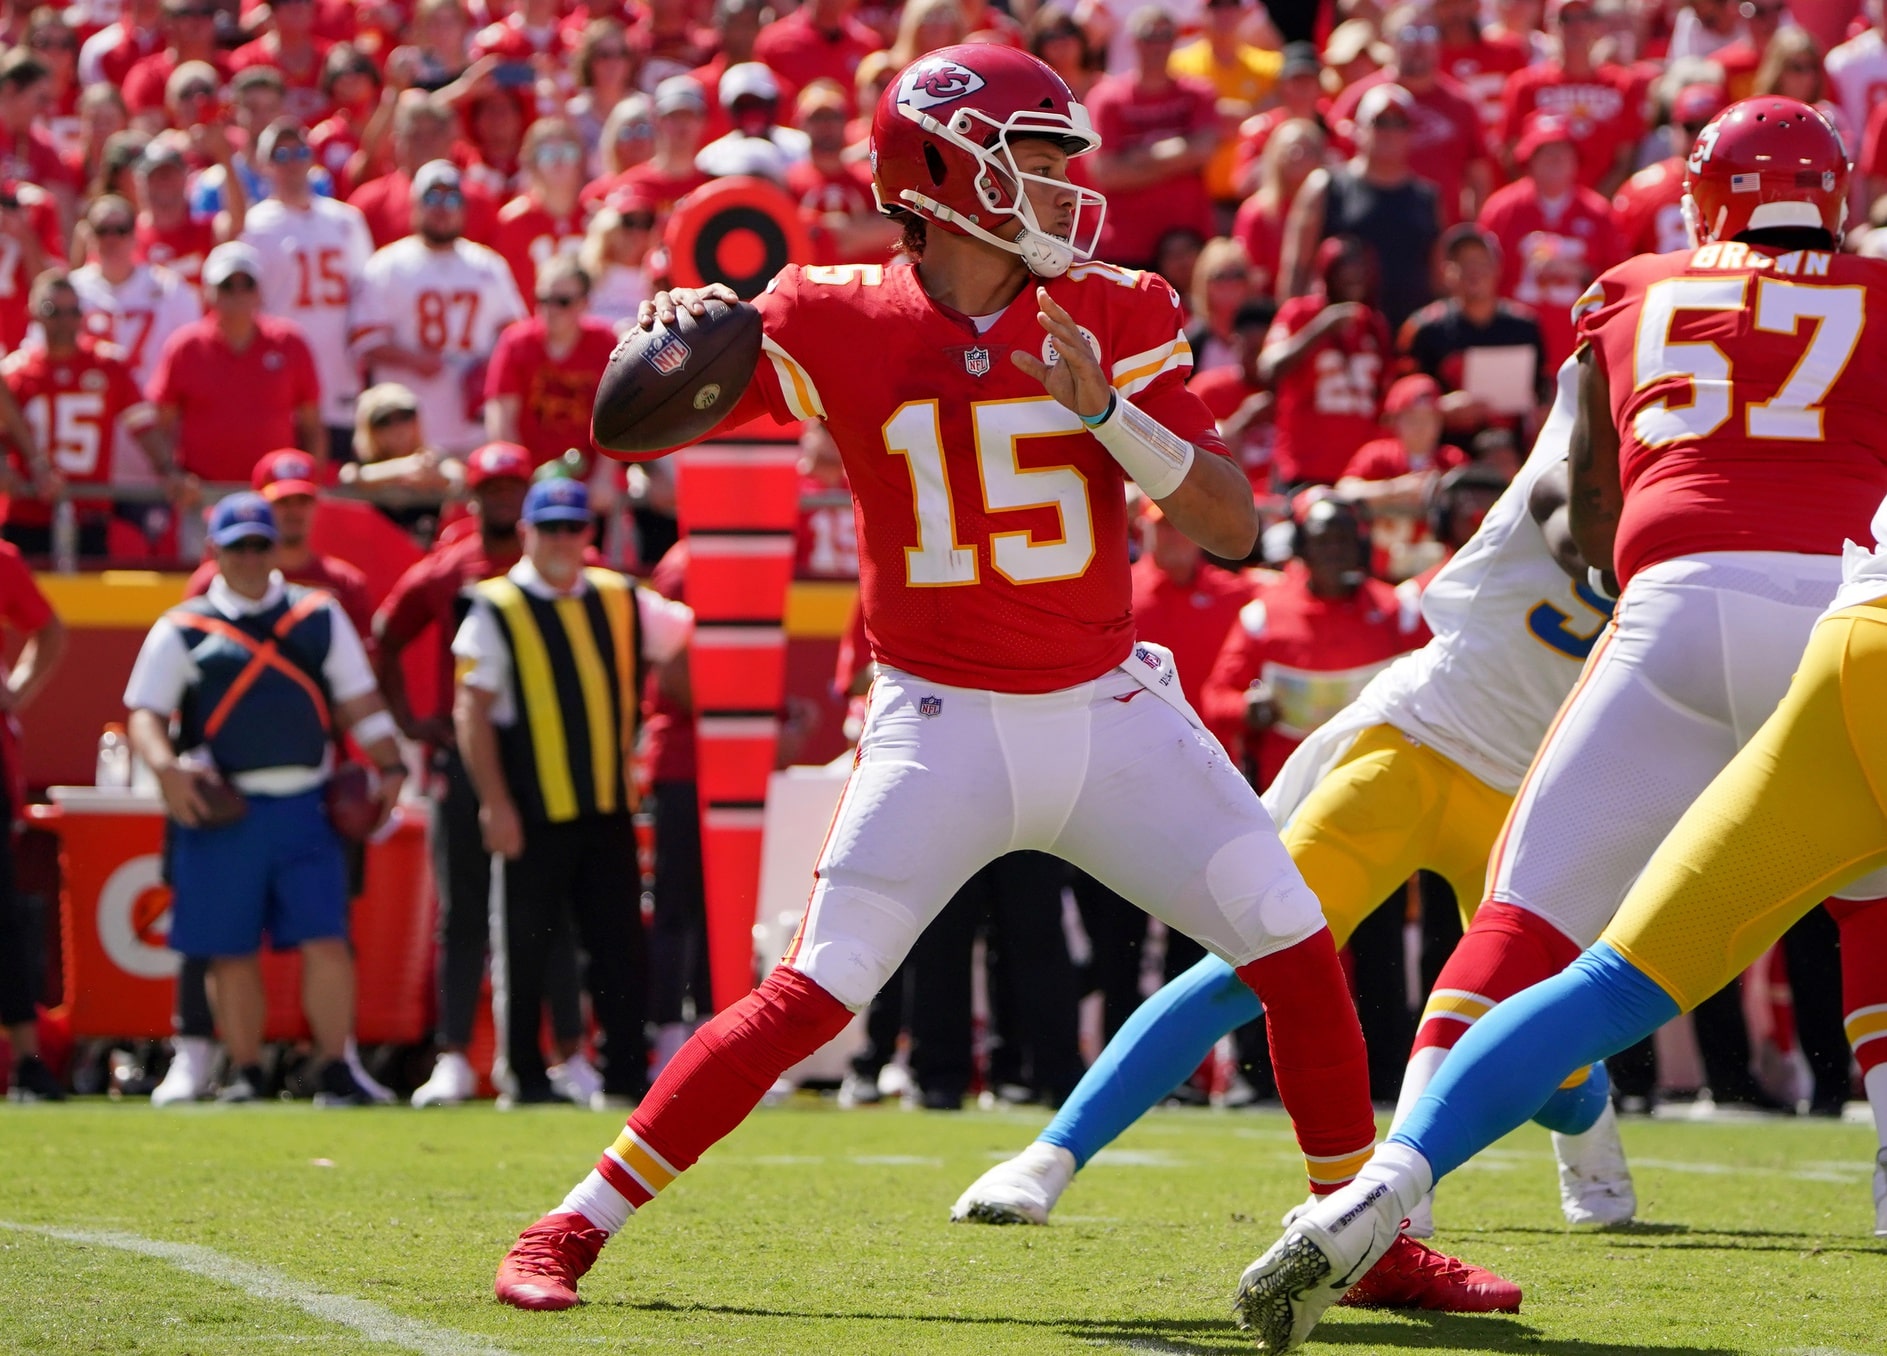 Kansas City Chiefs quarterback Patrick Mahomes (15) throws a pass against the Los Angeles Chargers during the second half at GEHA Field at Arrowhead Stadium.